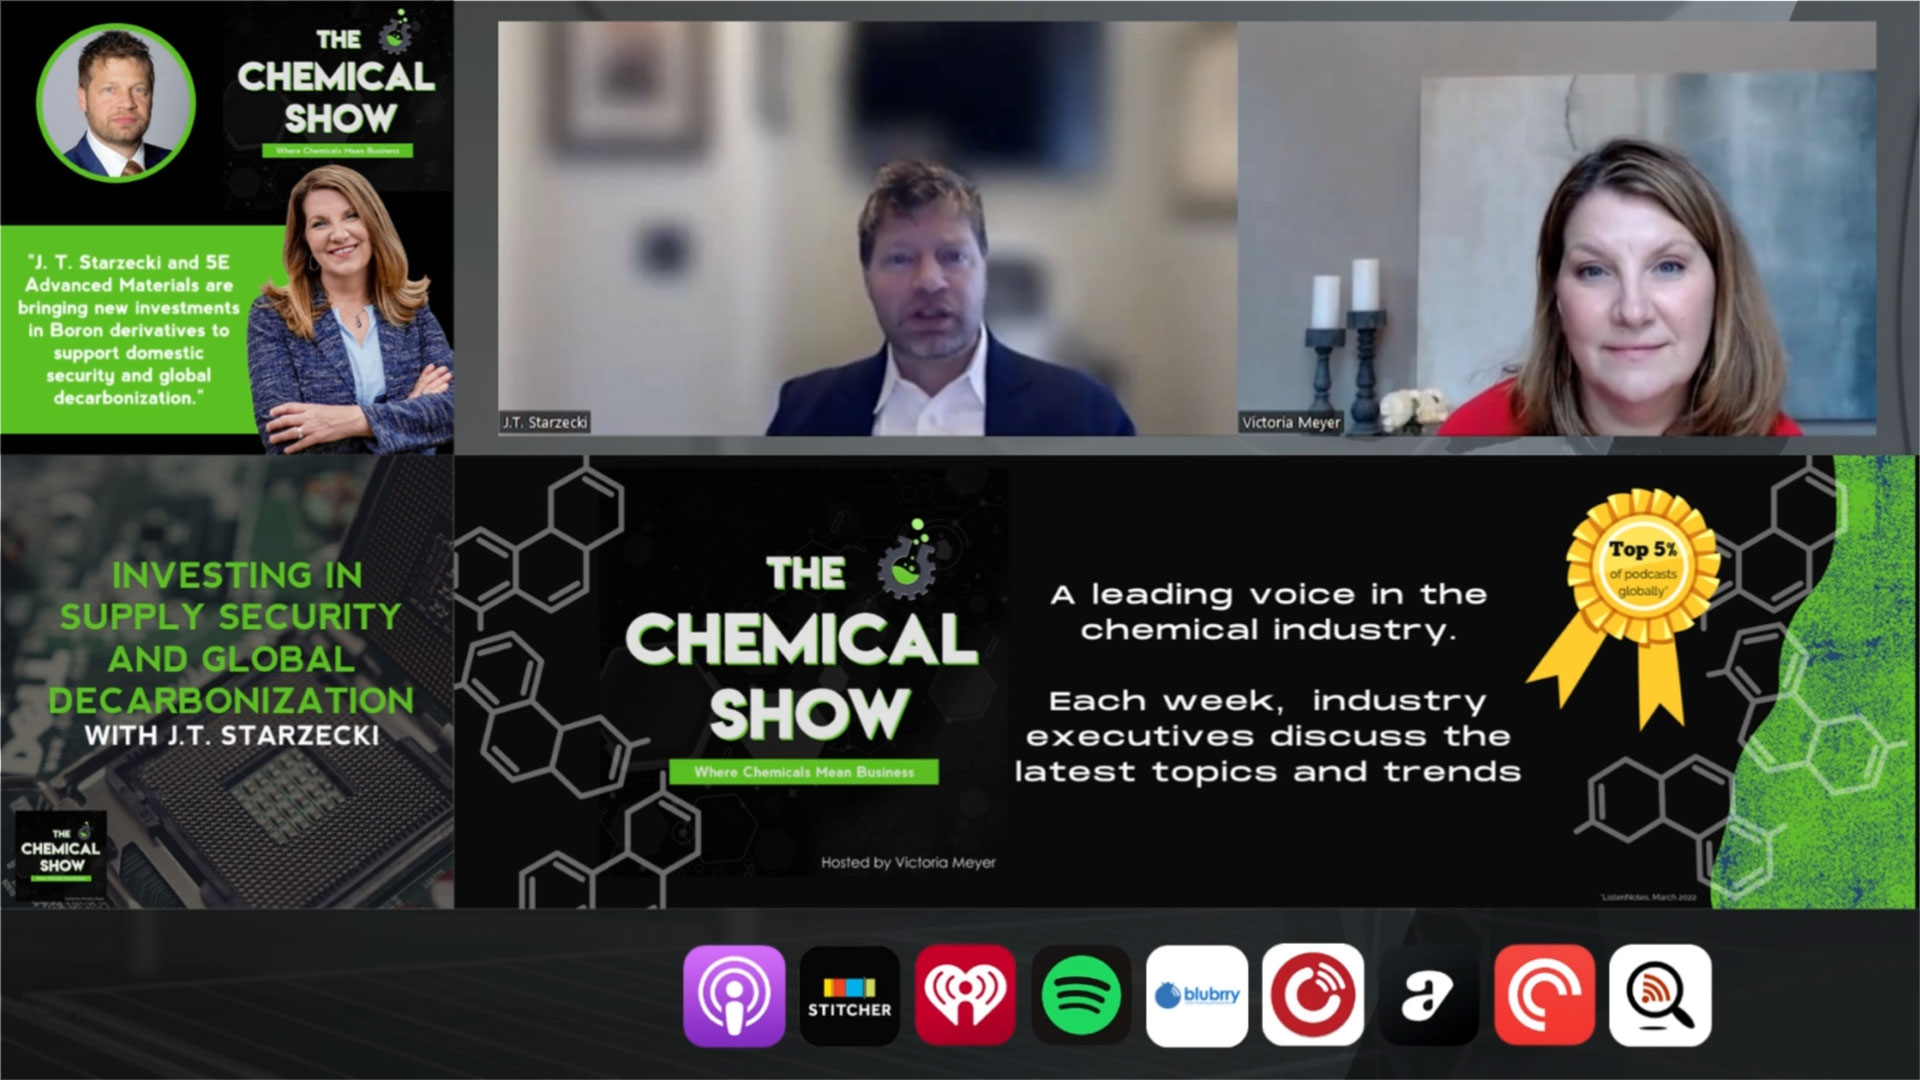 The Chemical Show – Investing in Supply Security and Global Decarbonisation with J.T. Starzecki